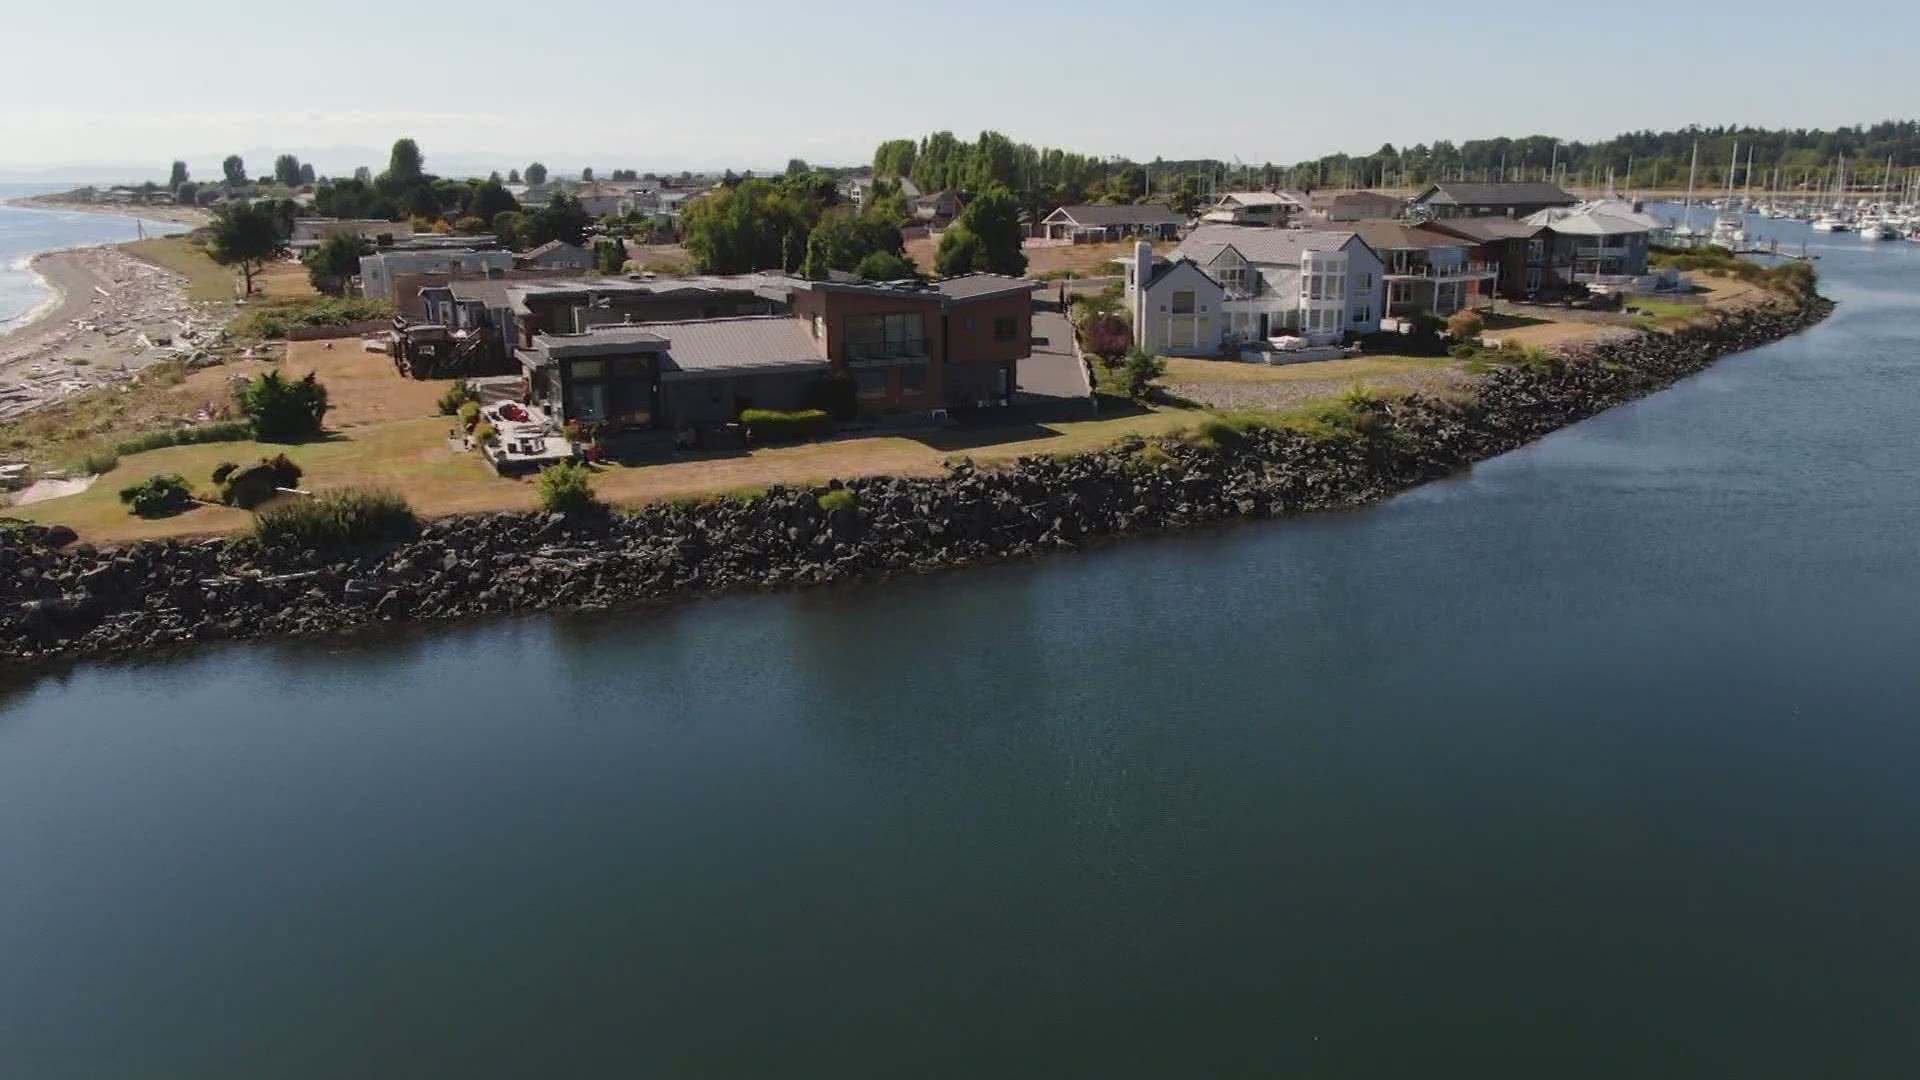 Point Roberts shares its only land border with Canada, where only 3 percent of the population is vaccinated.